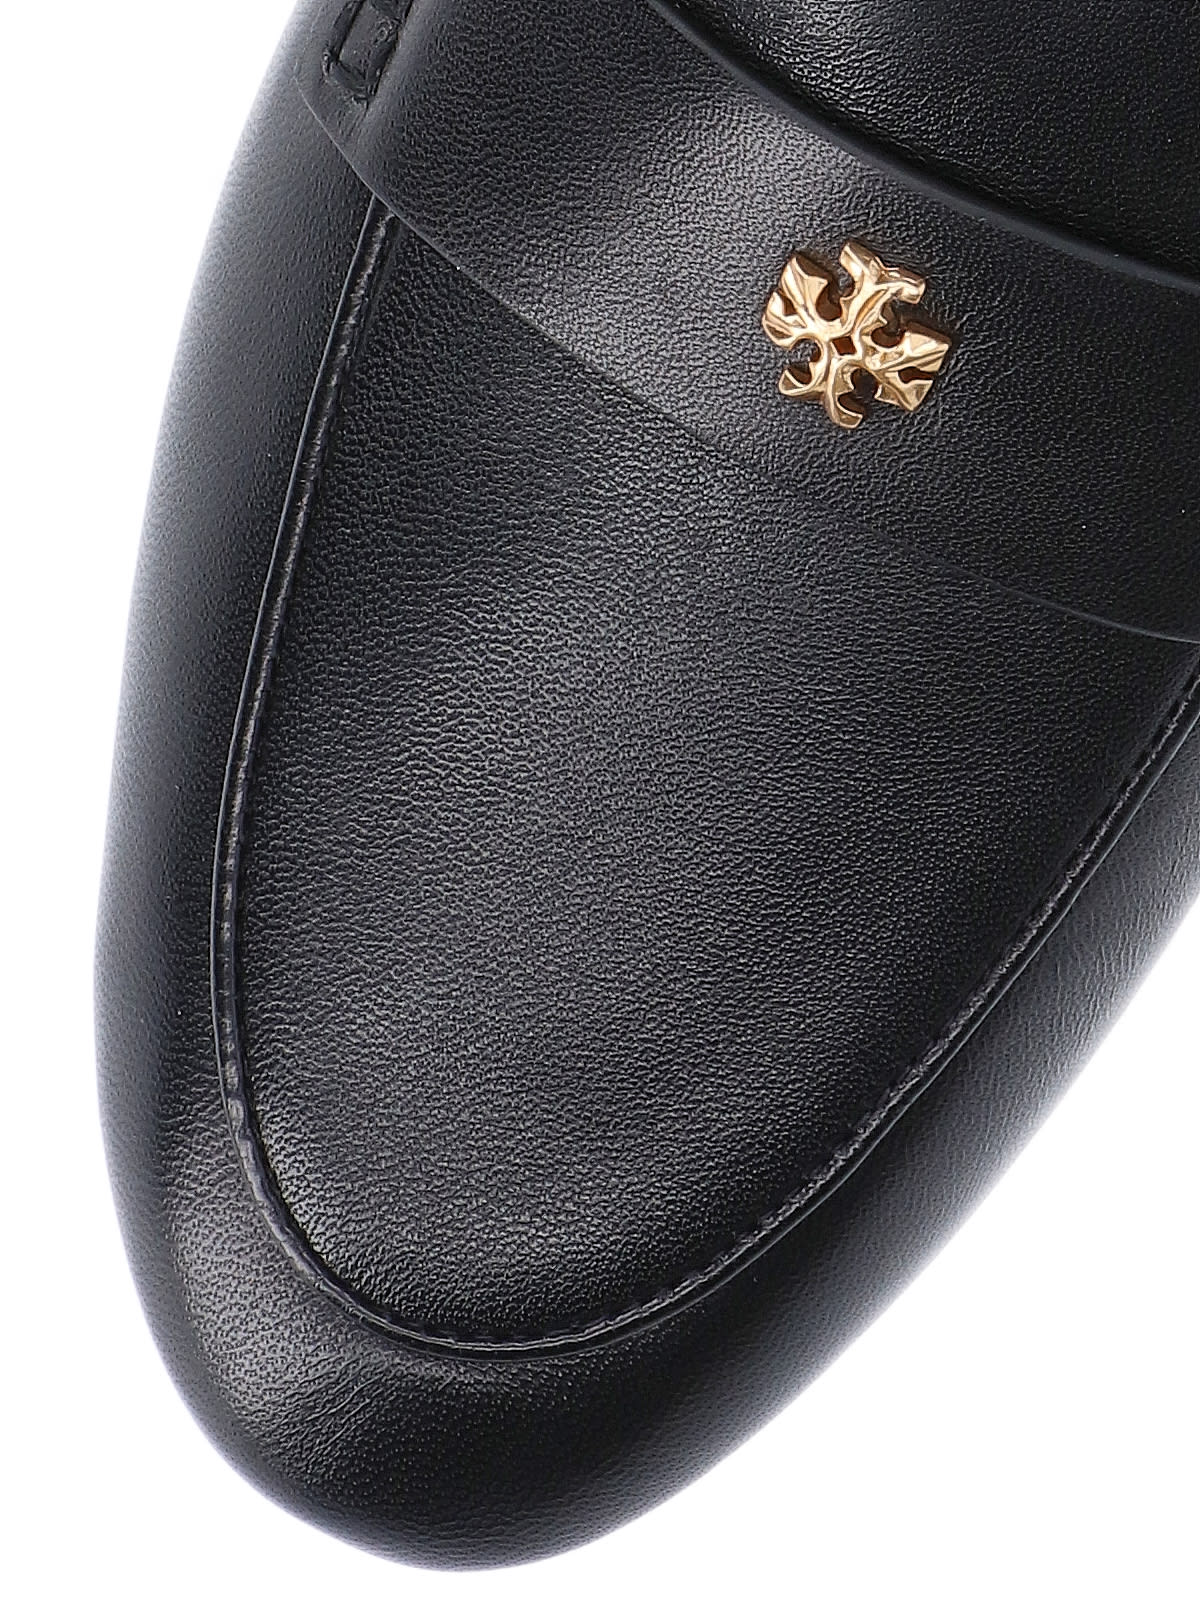 Shop Tory Burch Ballerina Loafers In Black